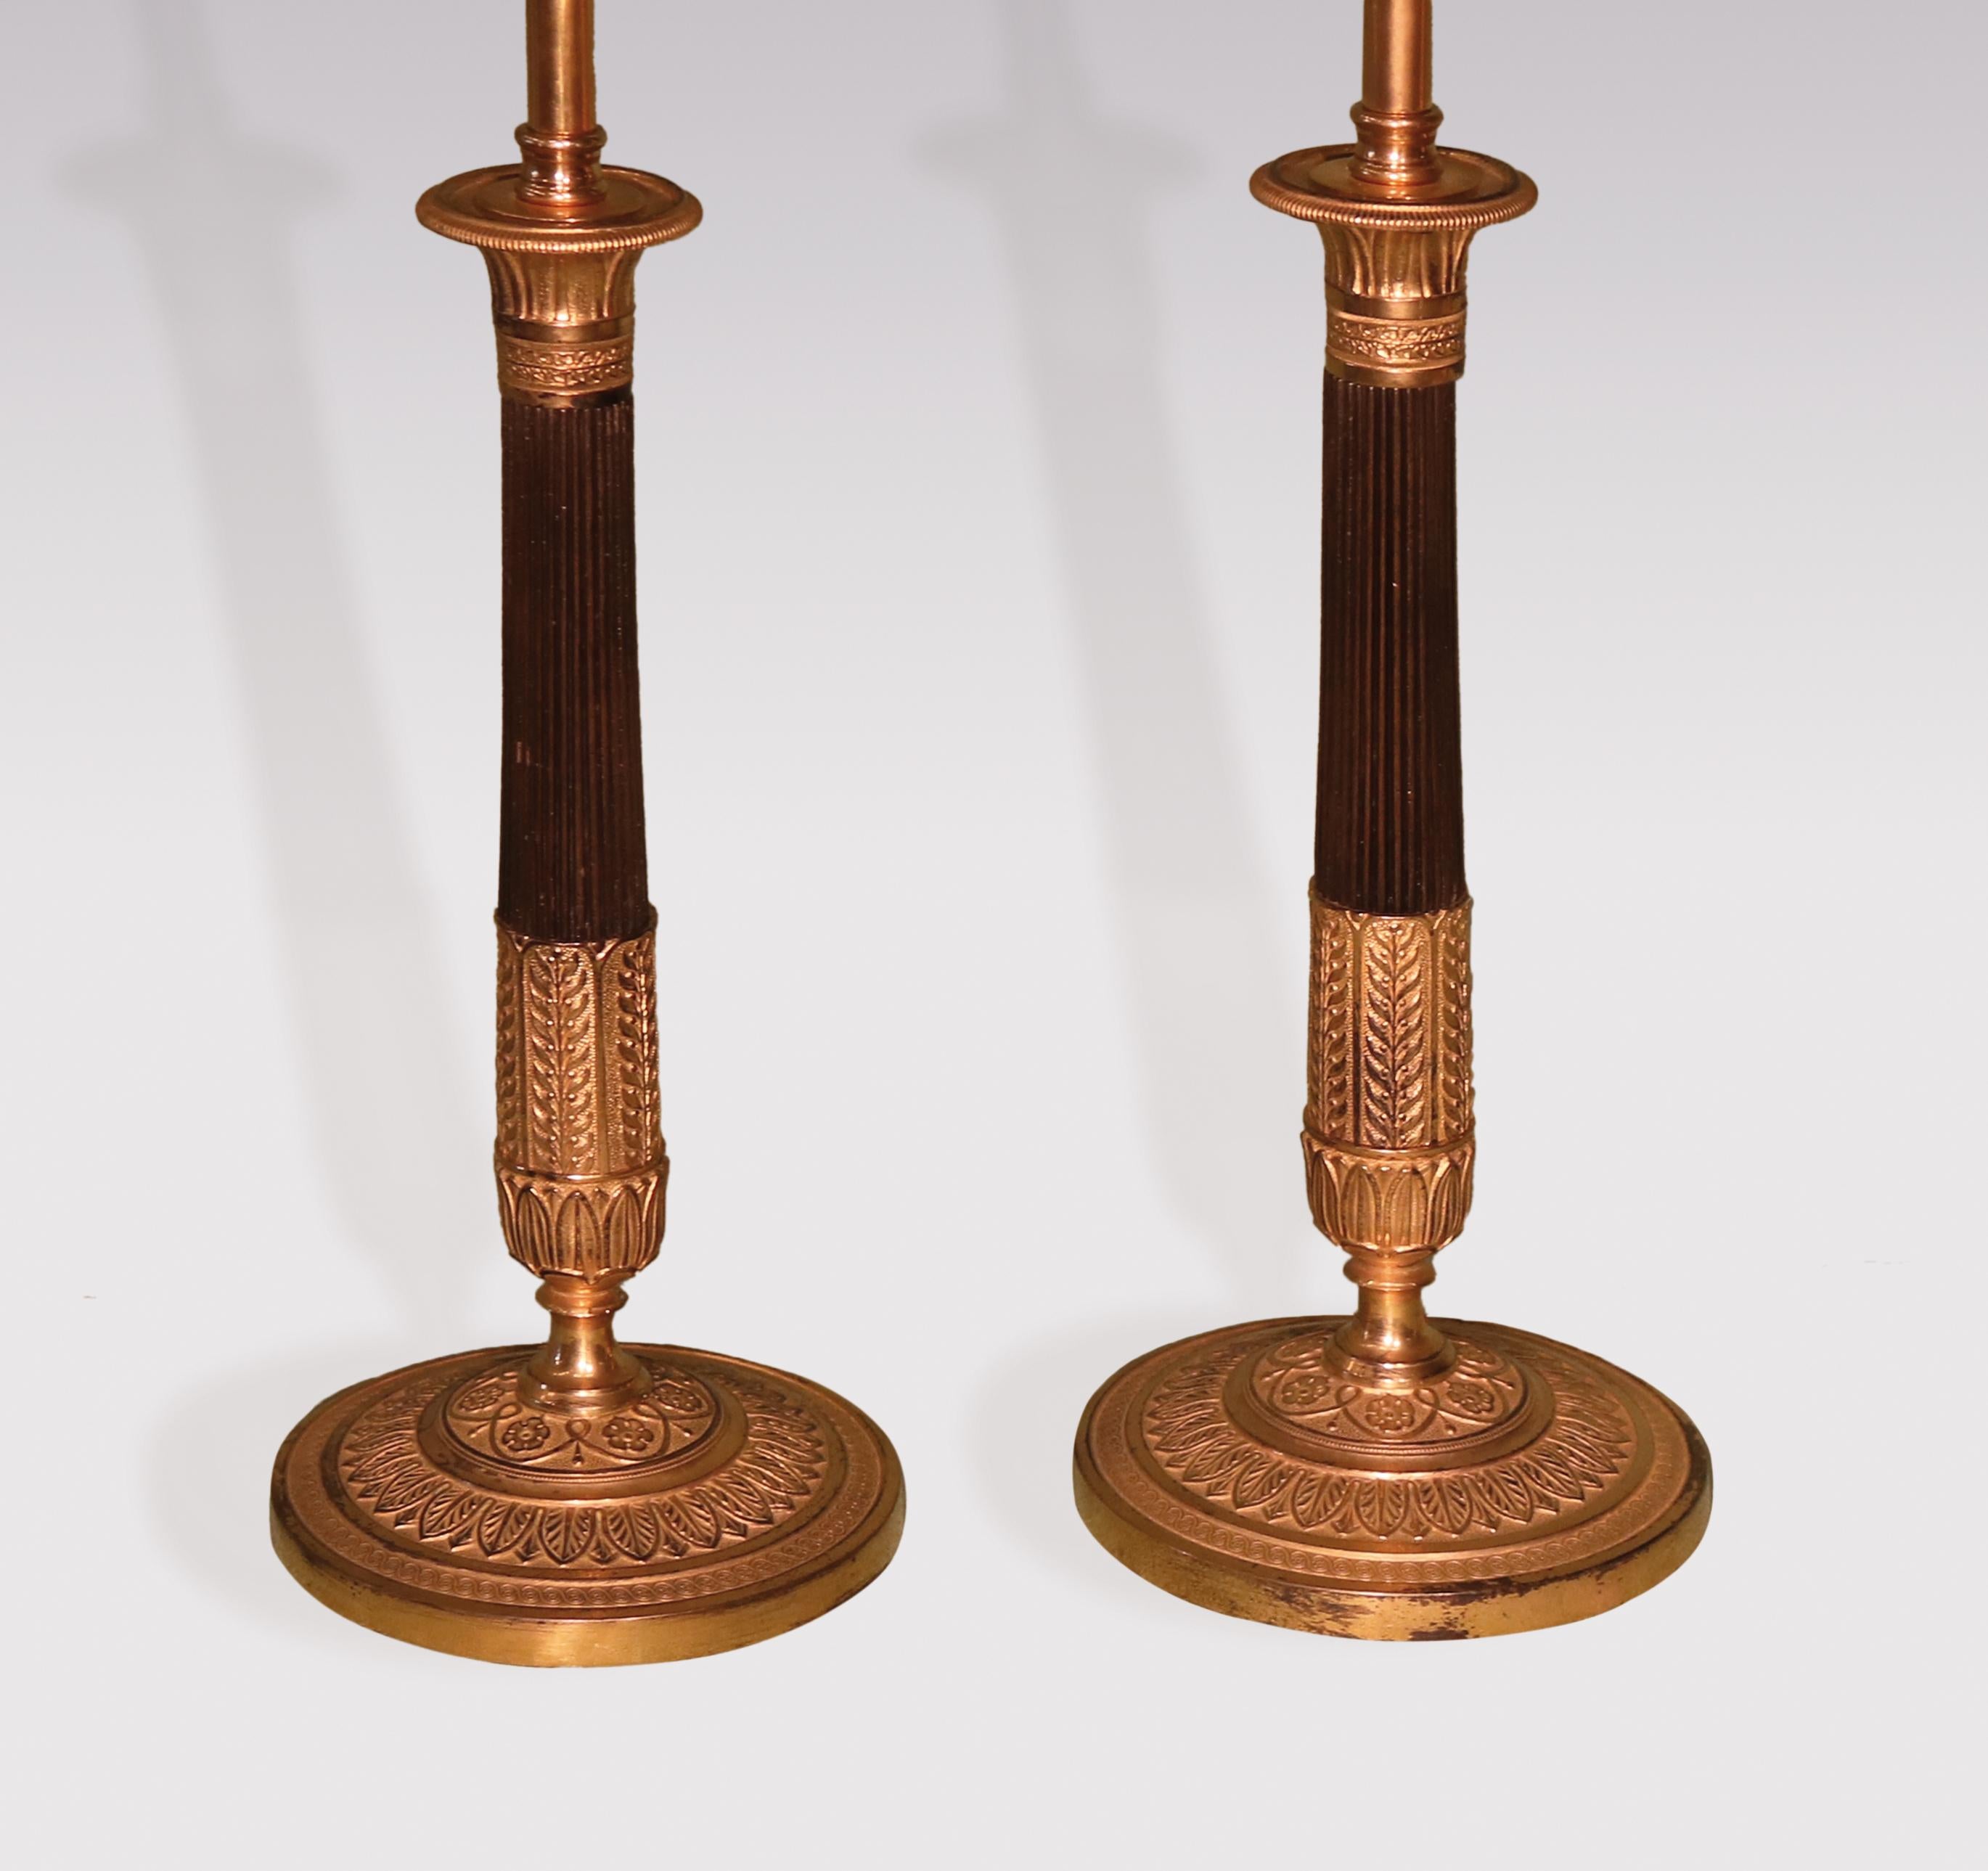 A pair of early 19th century bronze & ormolu candlesticks, having lotus leaf sconces above reeded tapering stems with leaf & berry decoration, raised on leaf & flower decorated circular bases. (Now converted to lamps), height of candlesticks 10